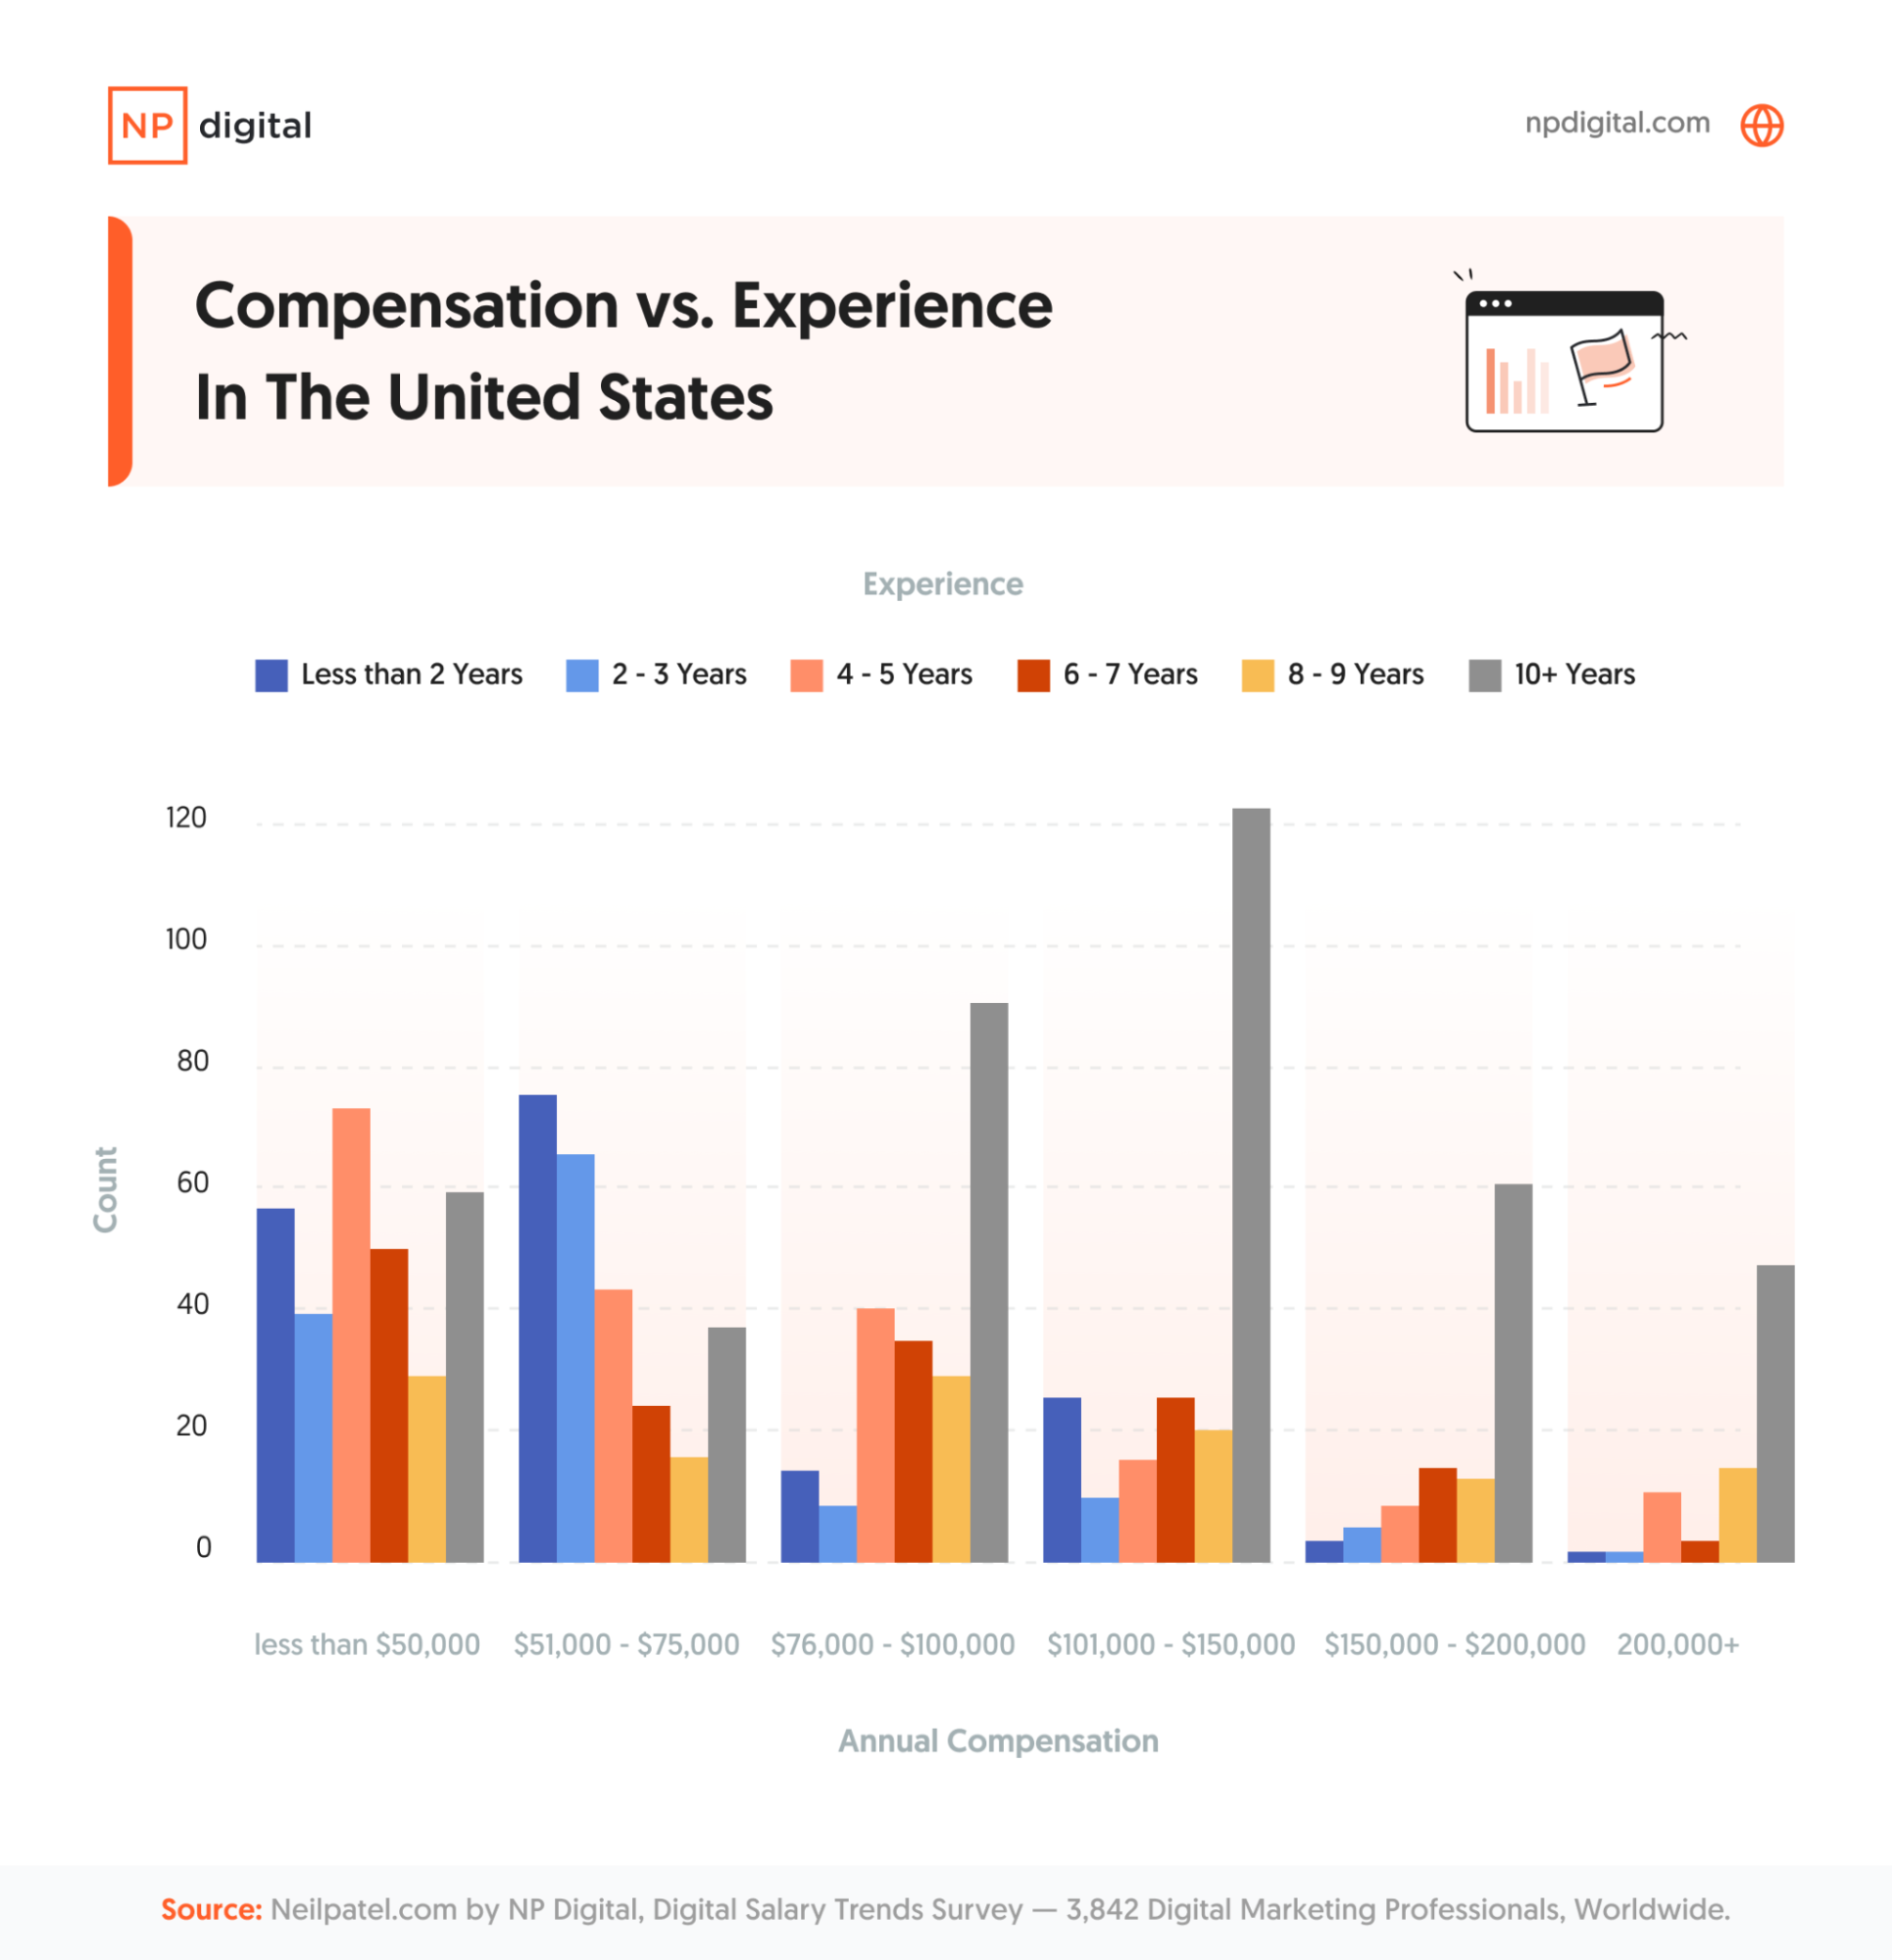 A bar chart comparing compensation vs. experience in the U.S.